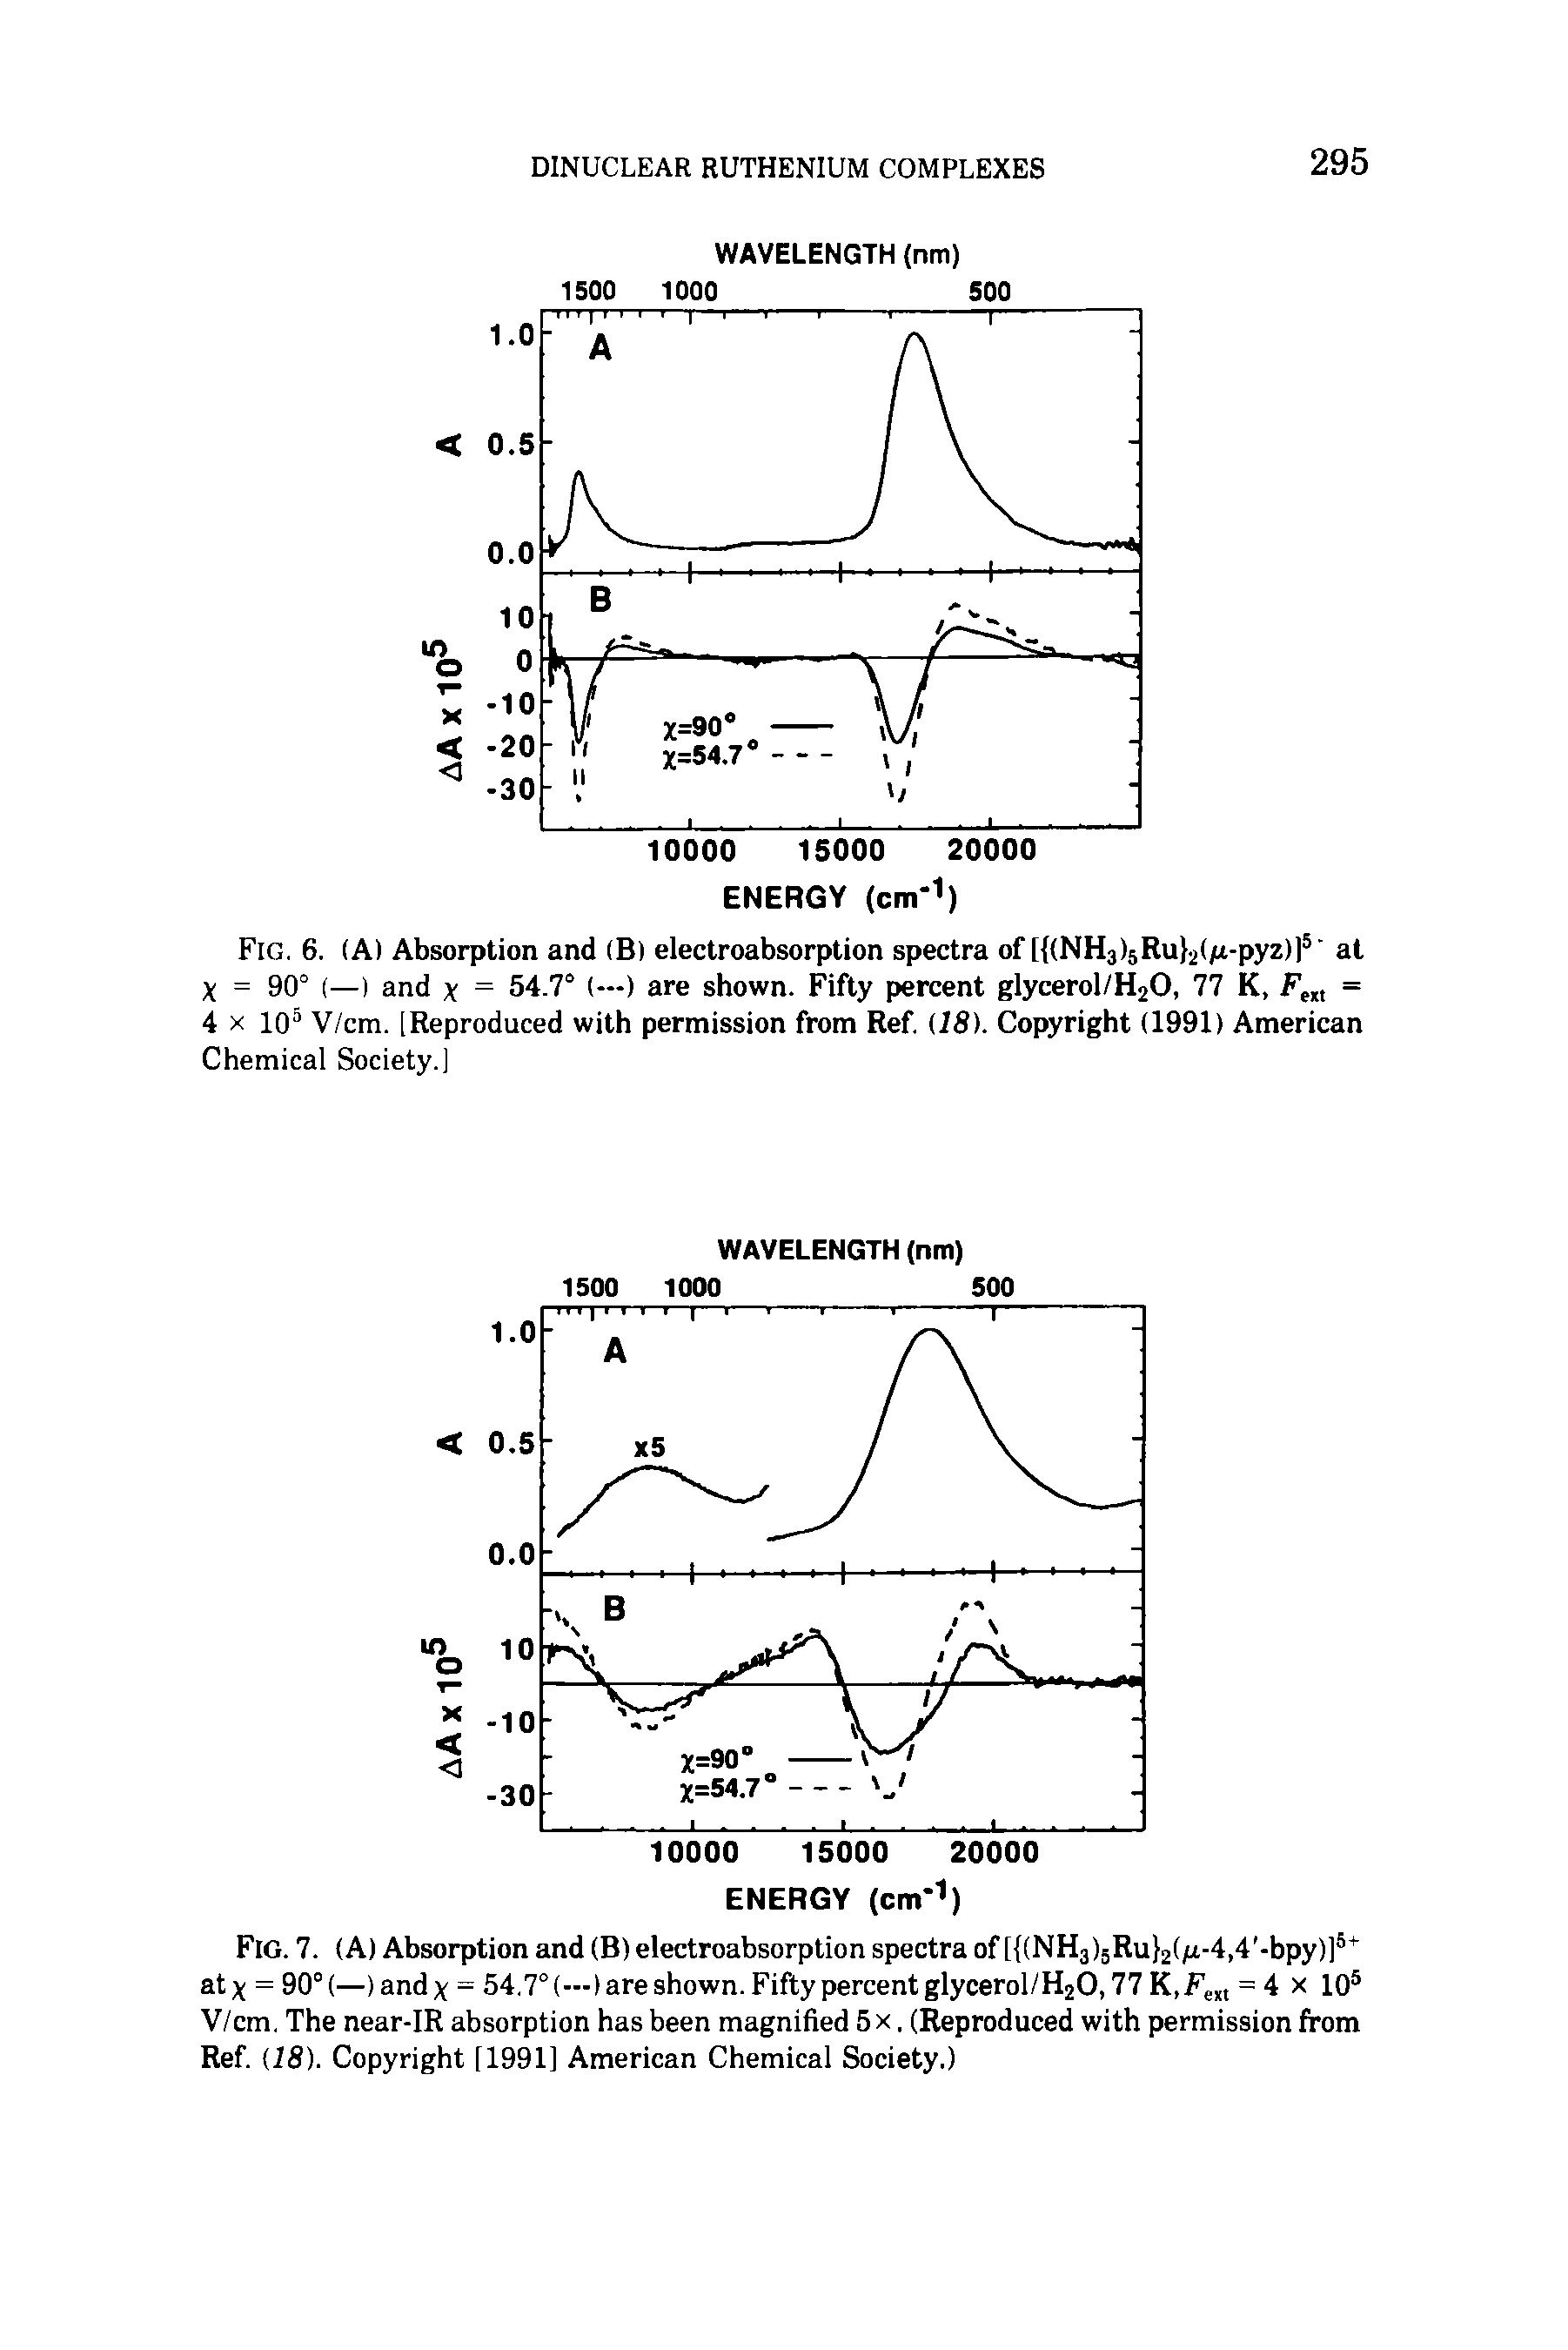 Fig. 7. (A) Absorption and (B) electroabsorption spectra of [ (NH3)5Ru 2(M-4,4 -bpy)]5+ aty = 90° (—)andy = 54.7° (—tare shown. Fifty percent glycerol/H20,77 K,Fe t = 4 x 105 V/cm. The near-IR absorption has been magnified 5x, (Reproduced with permission from Ref. (18). Copyright [1991] American Chemical Society.)...